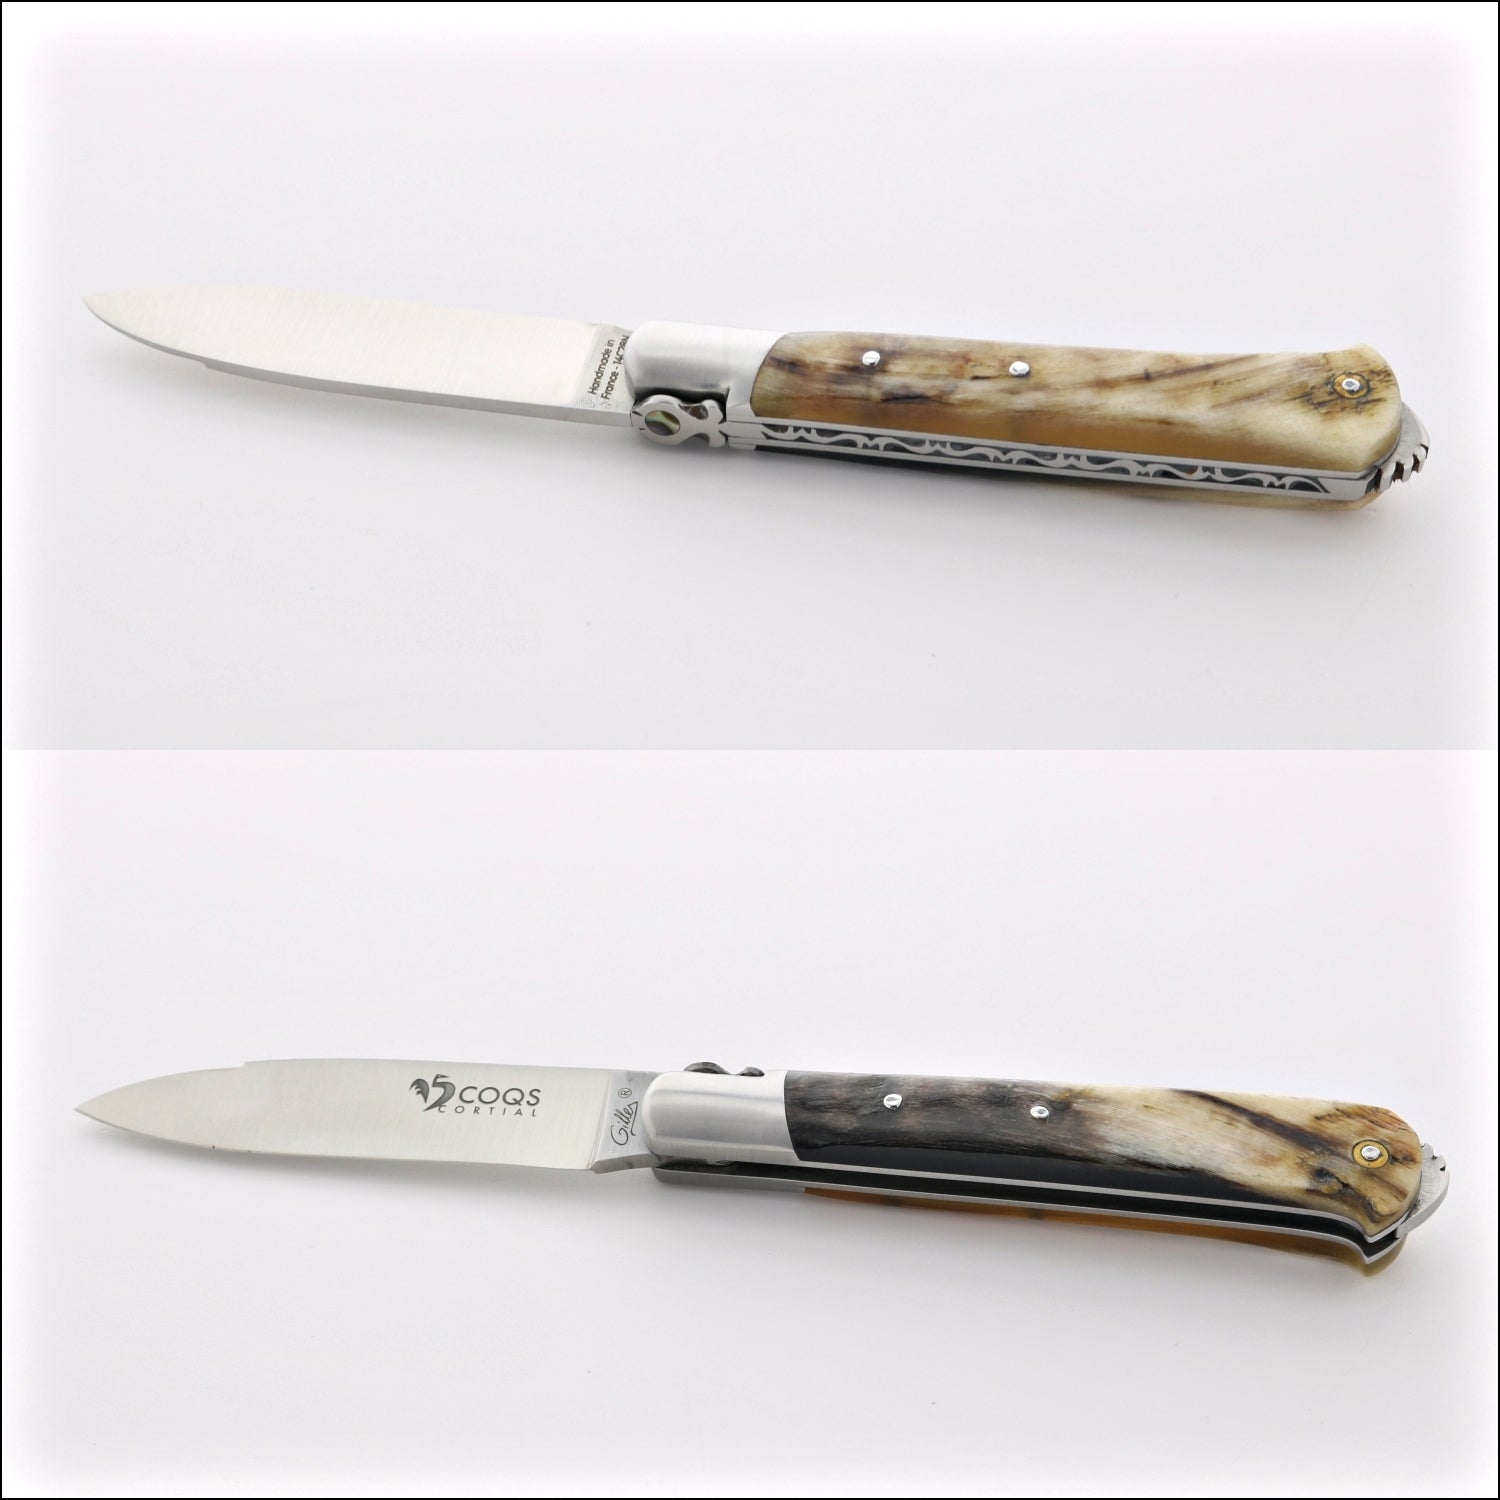 5 Coqs Pocket Knife - Dark Ram Horn & Mother of Pearl Inlay